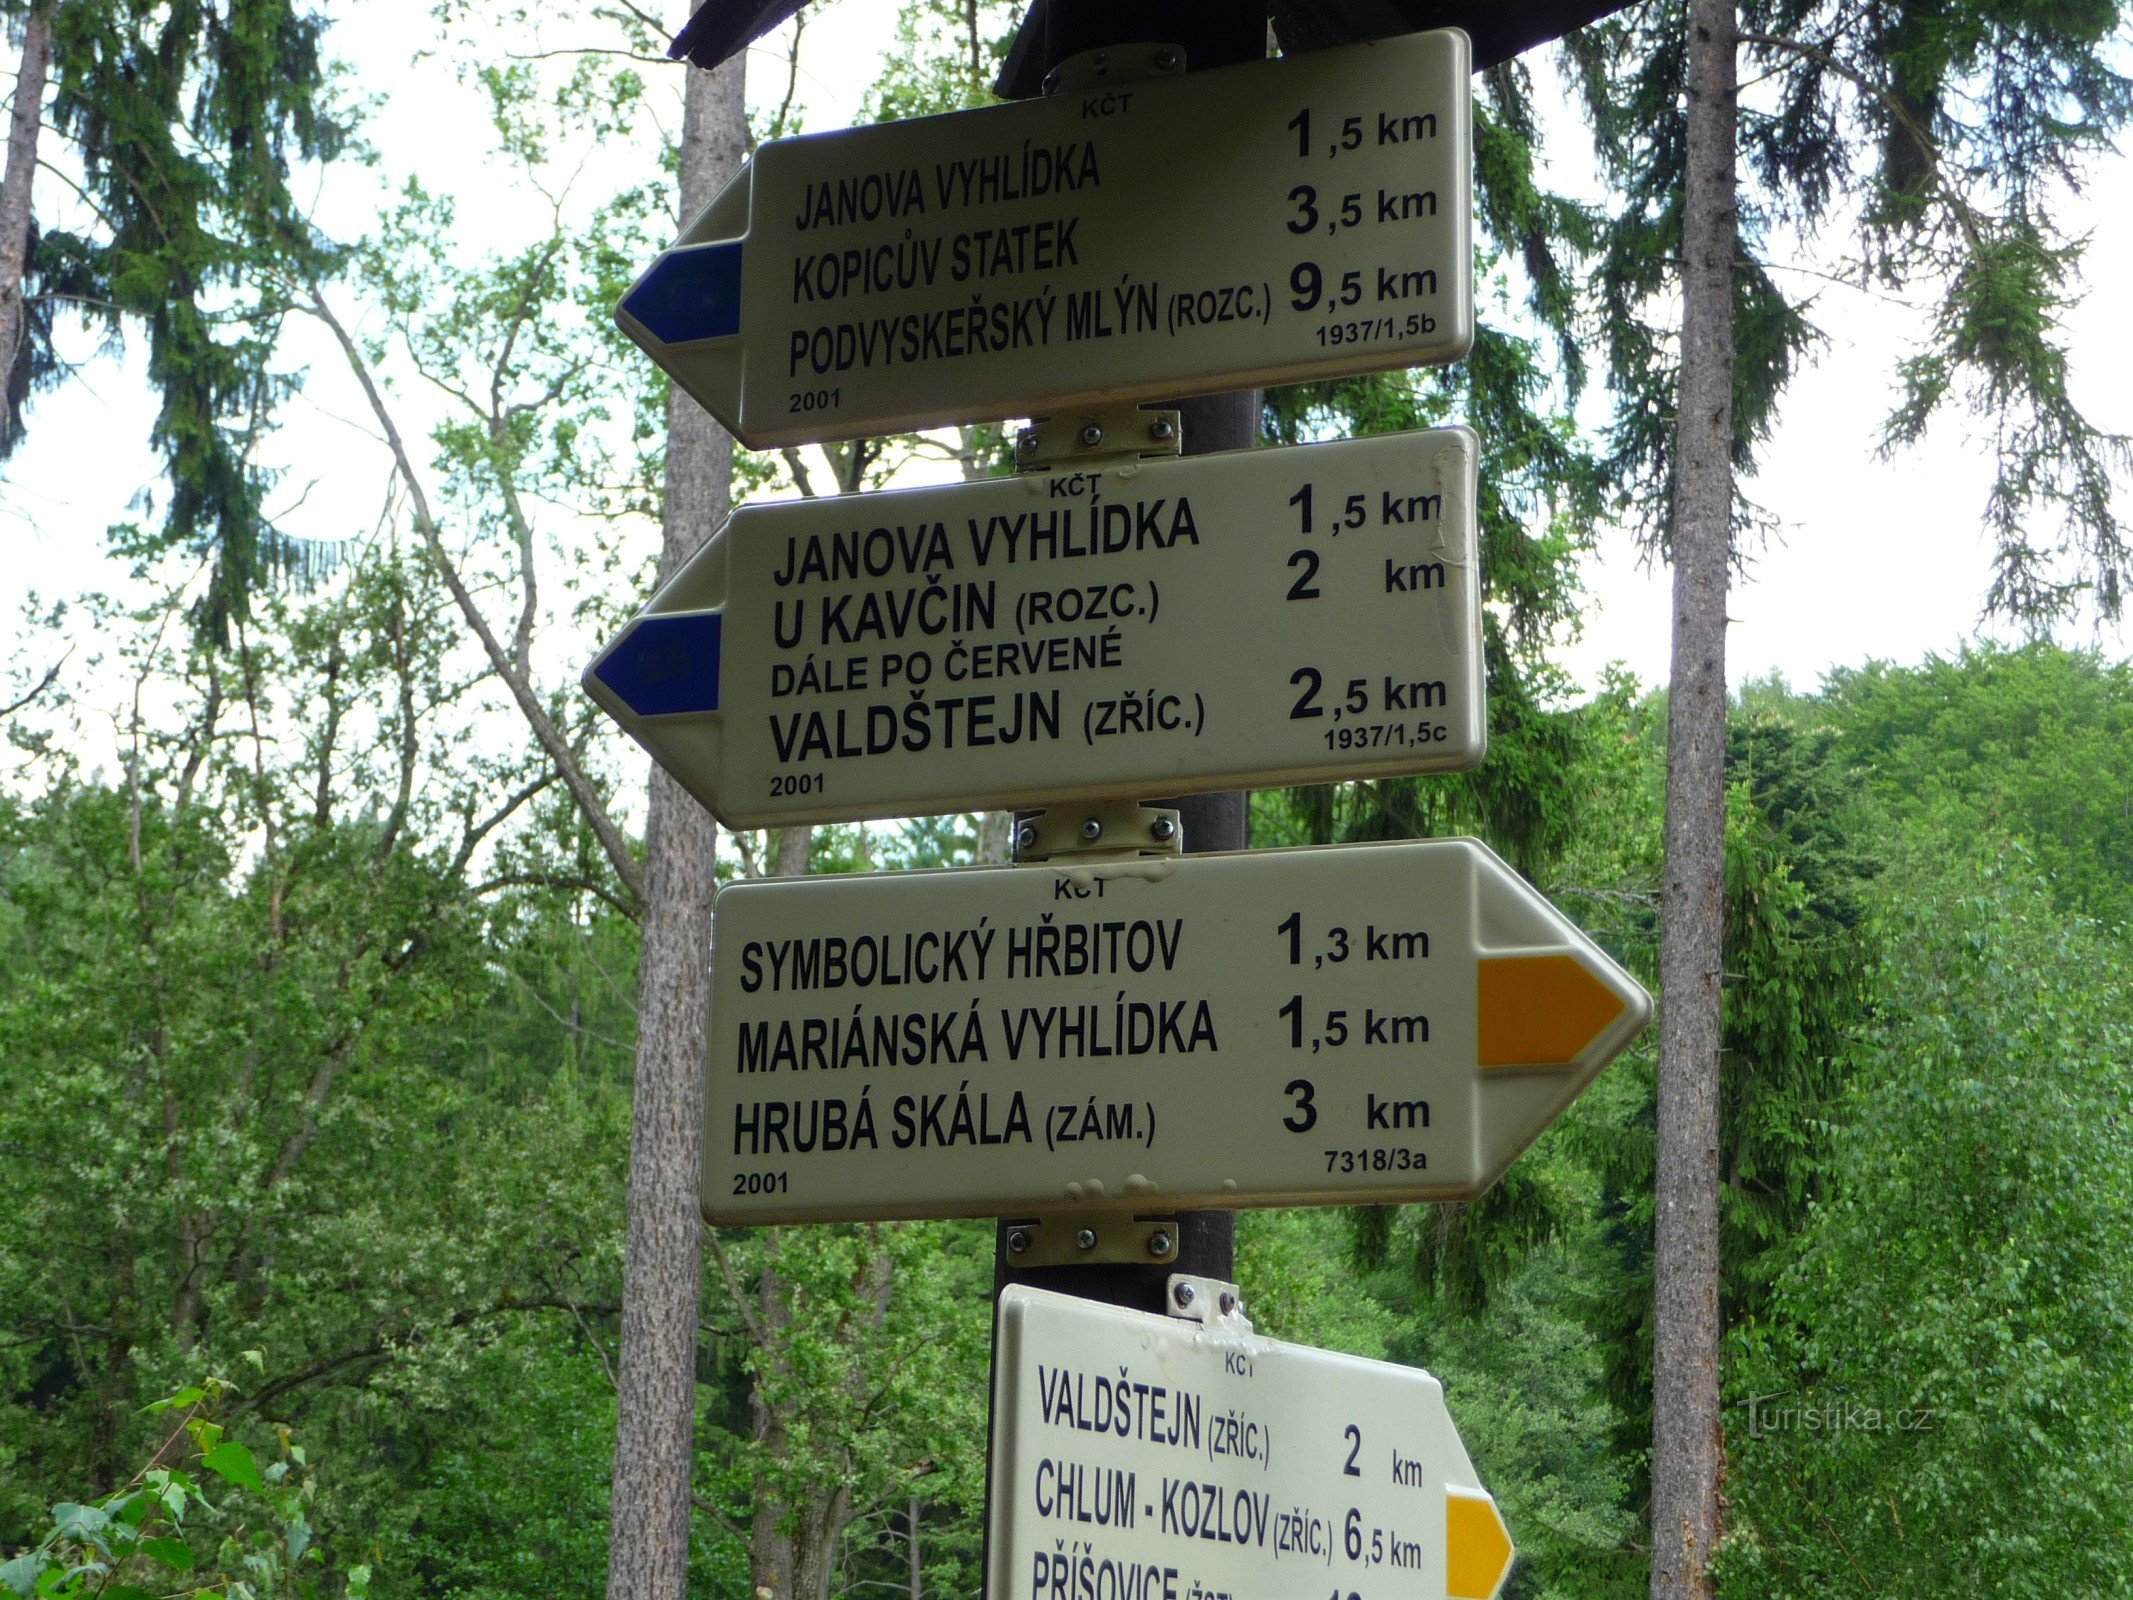 another signpost